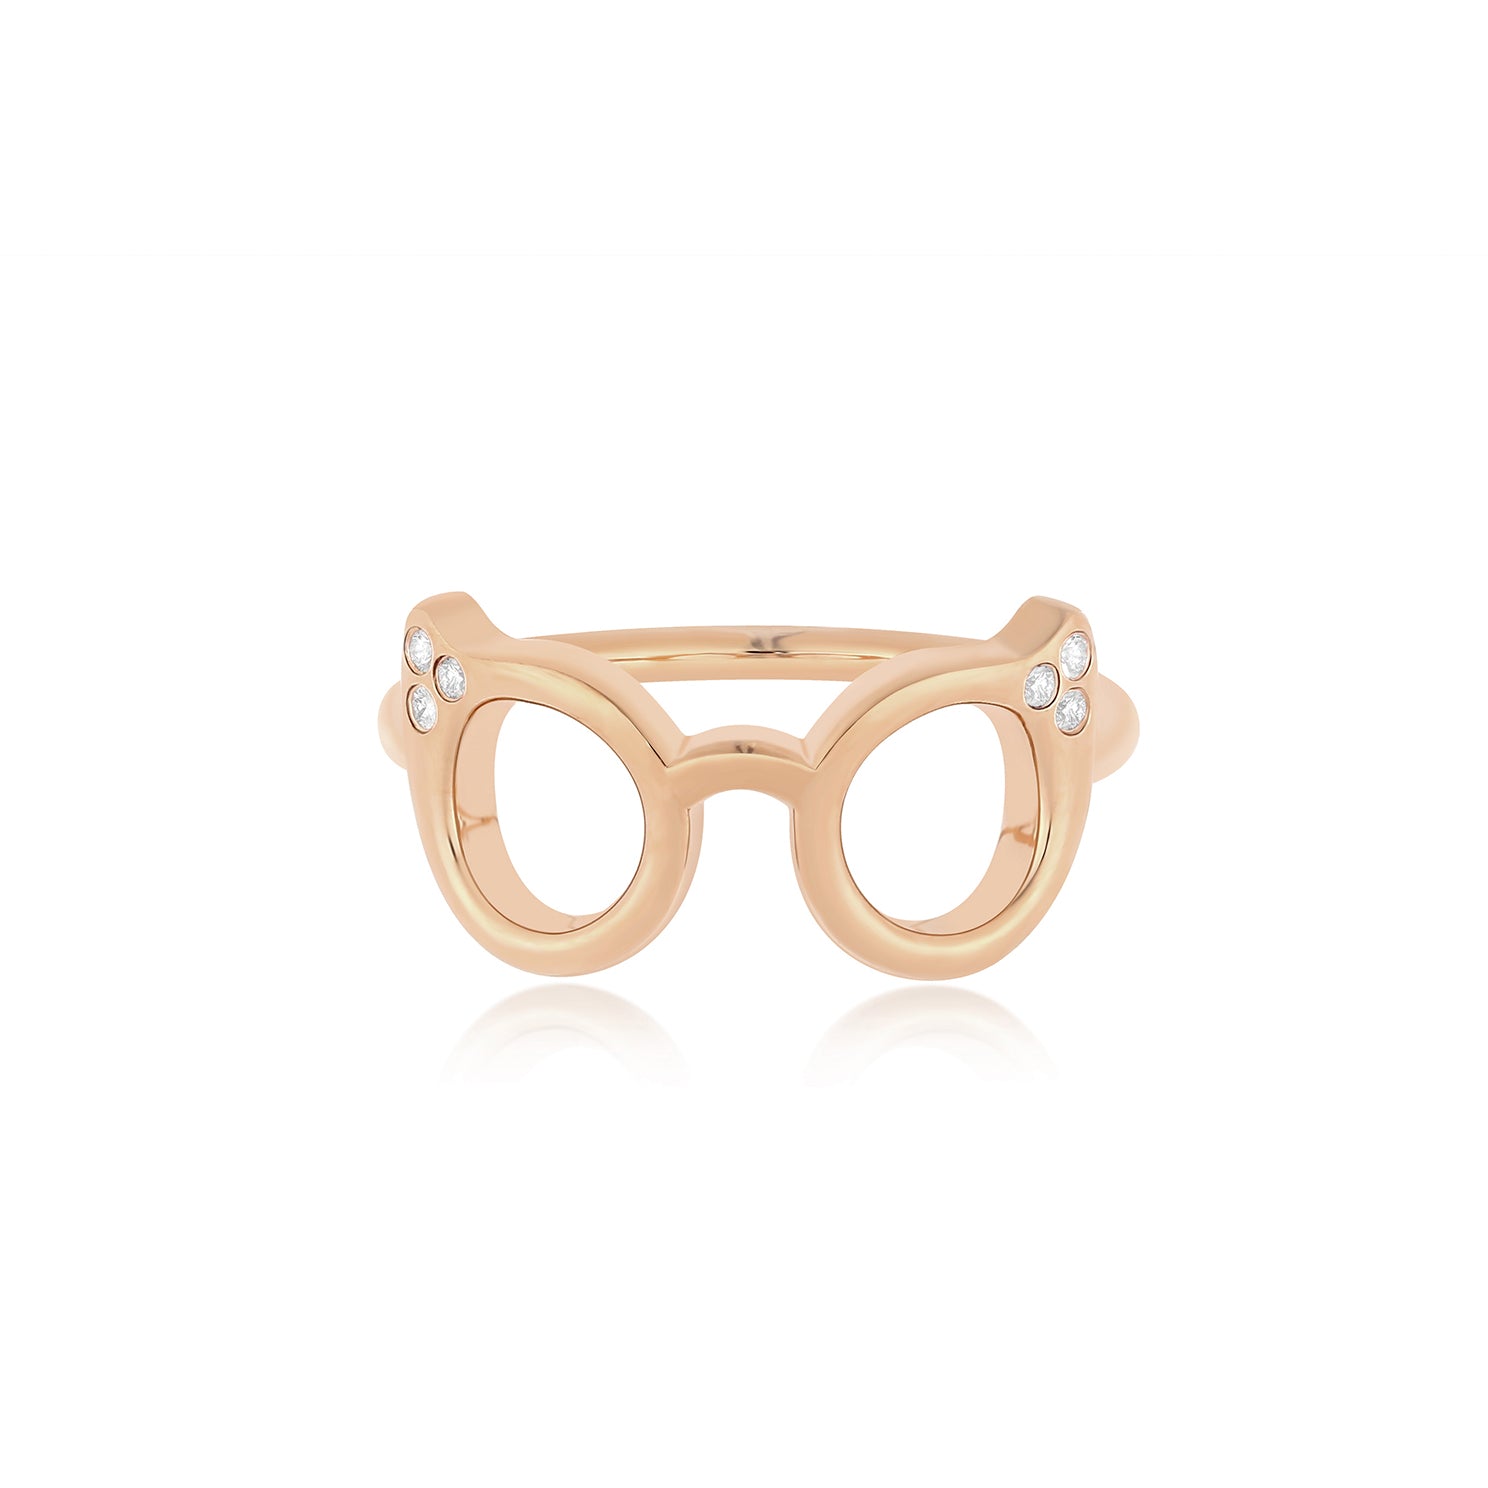 Evan's Sunnies Ring with Diamonds in 14k rose gold